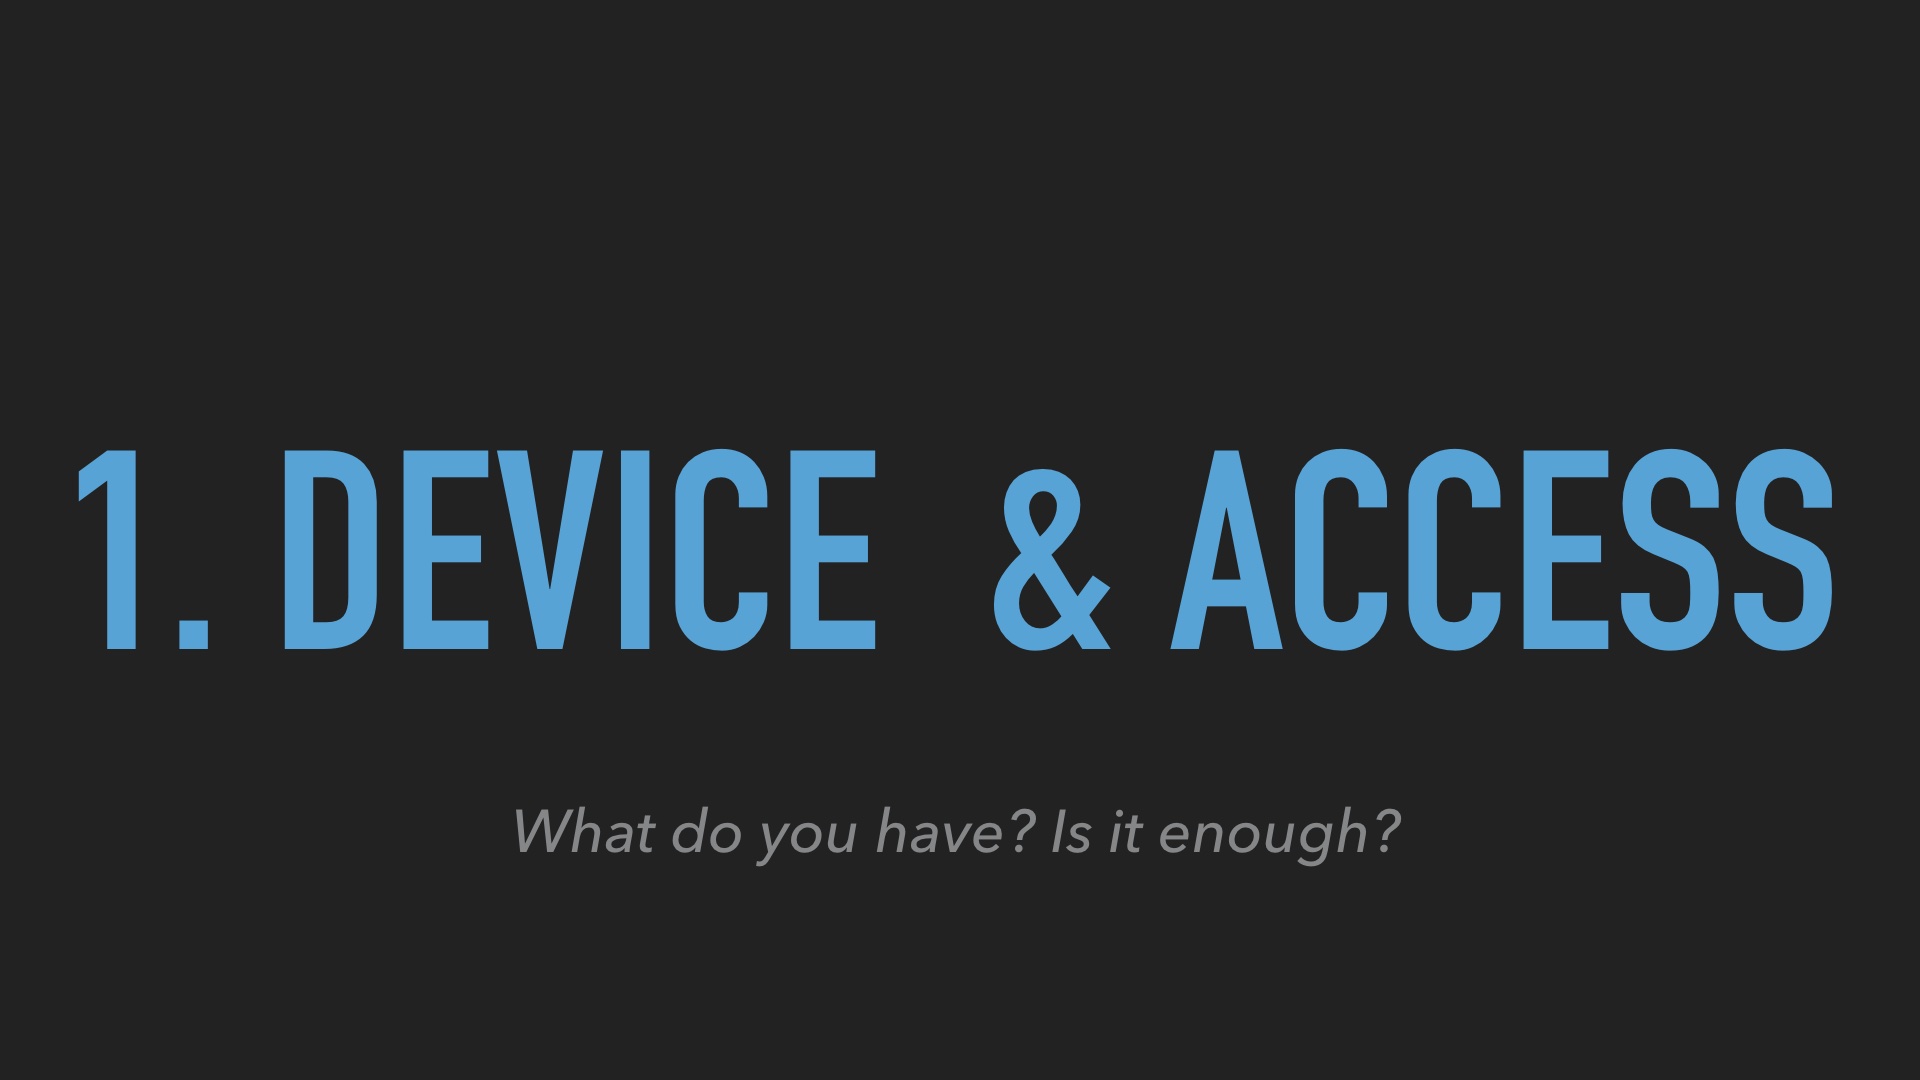 Title slide saying 1. Device & Access, subtitle 